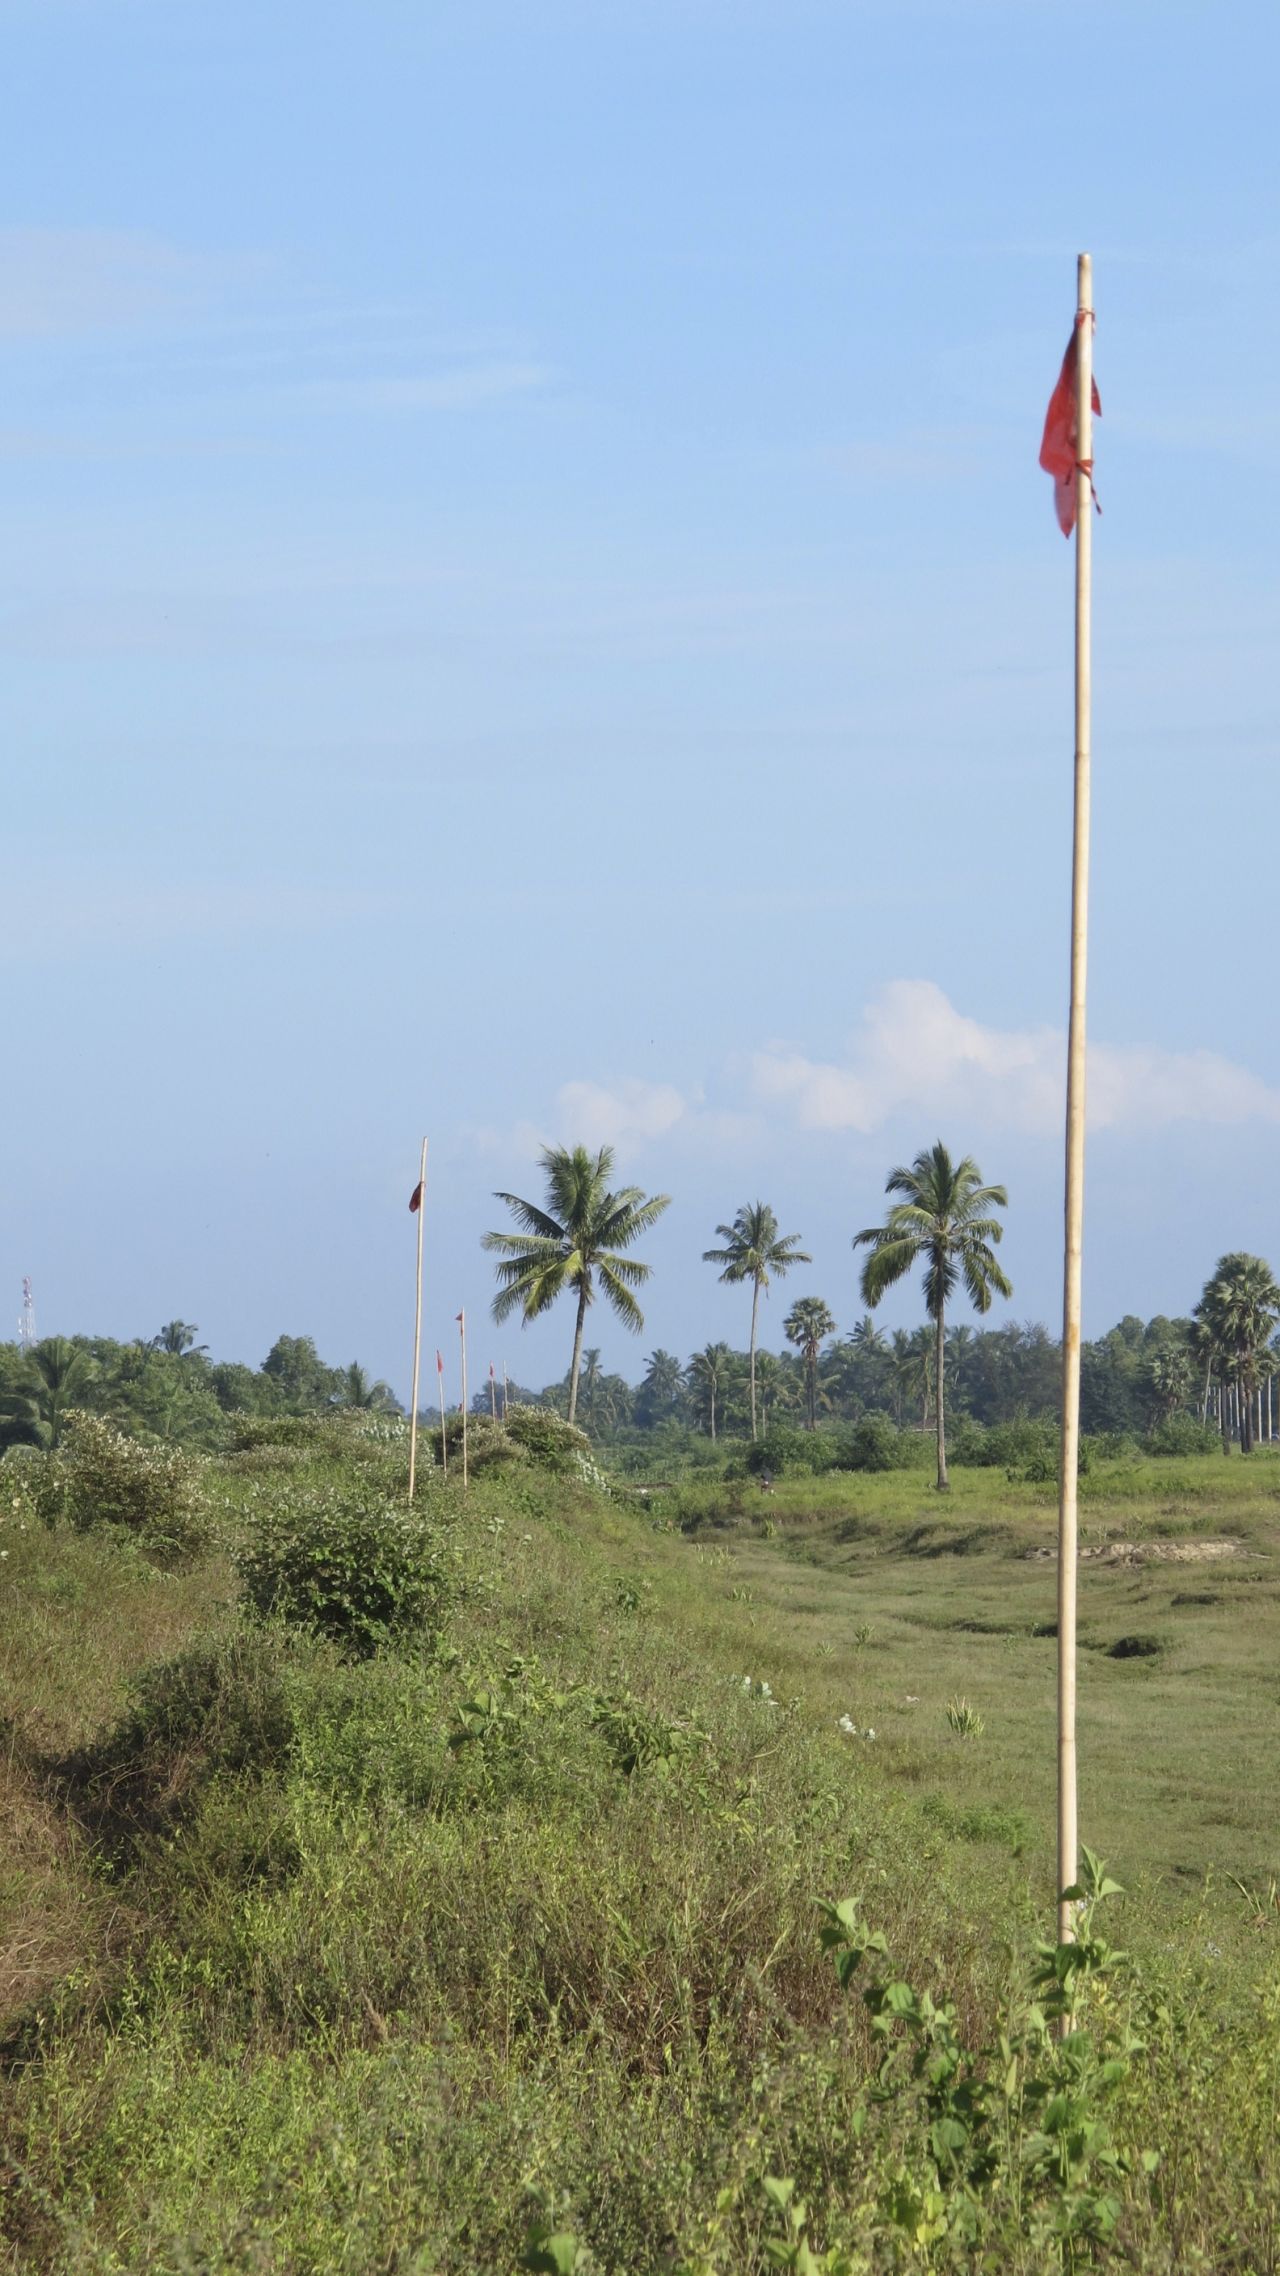 This row of red flags marks a line beyond which Rohingya are not allowed to go. Buddhist Rakhine villages are to the left. There is no barrier or barbed wire stopping people from crossing, but local Muslims fear they would be attacked and killed if they did.